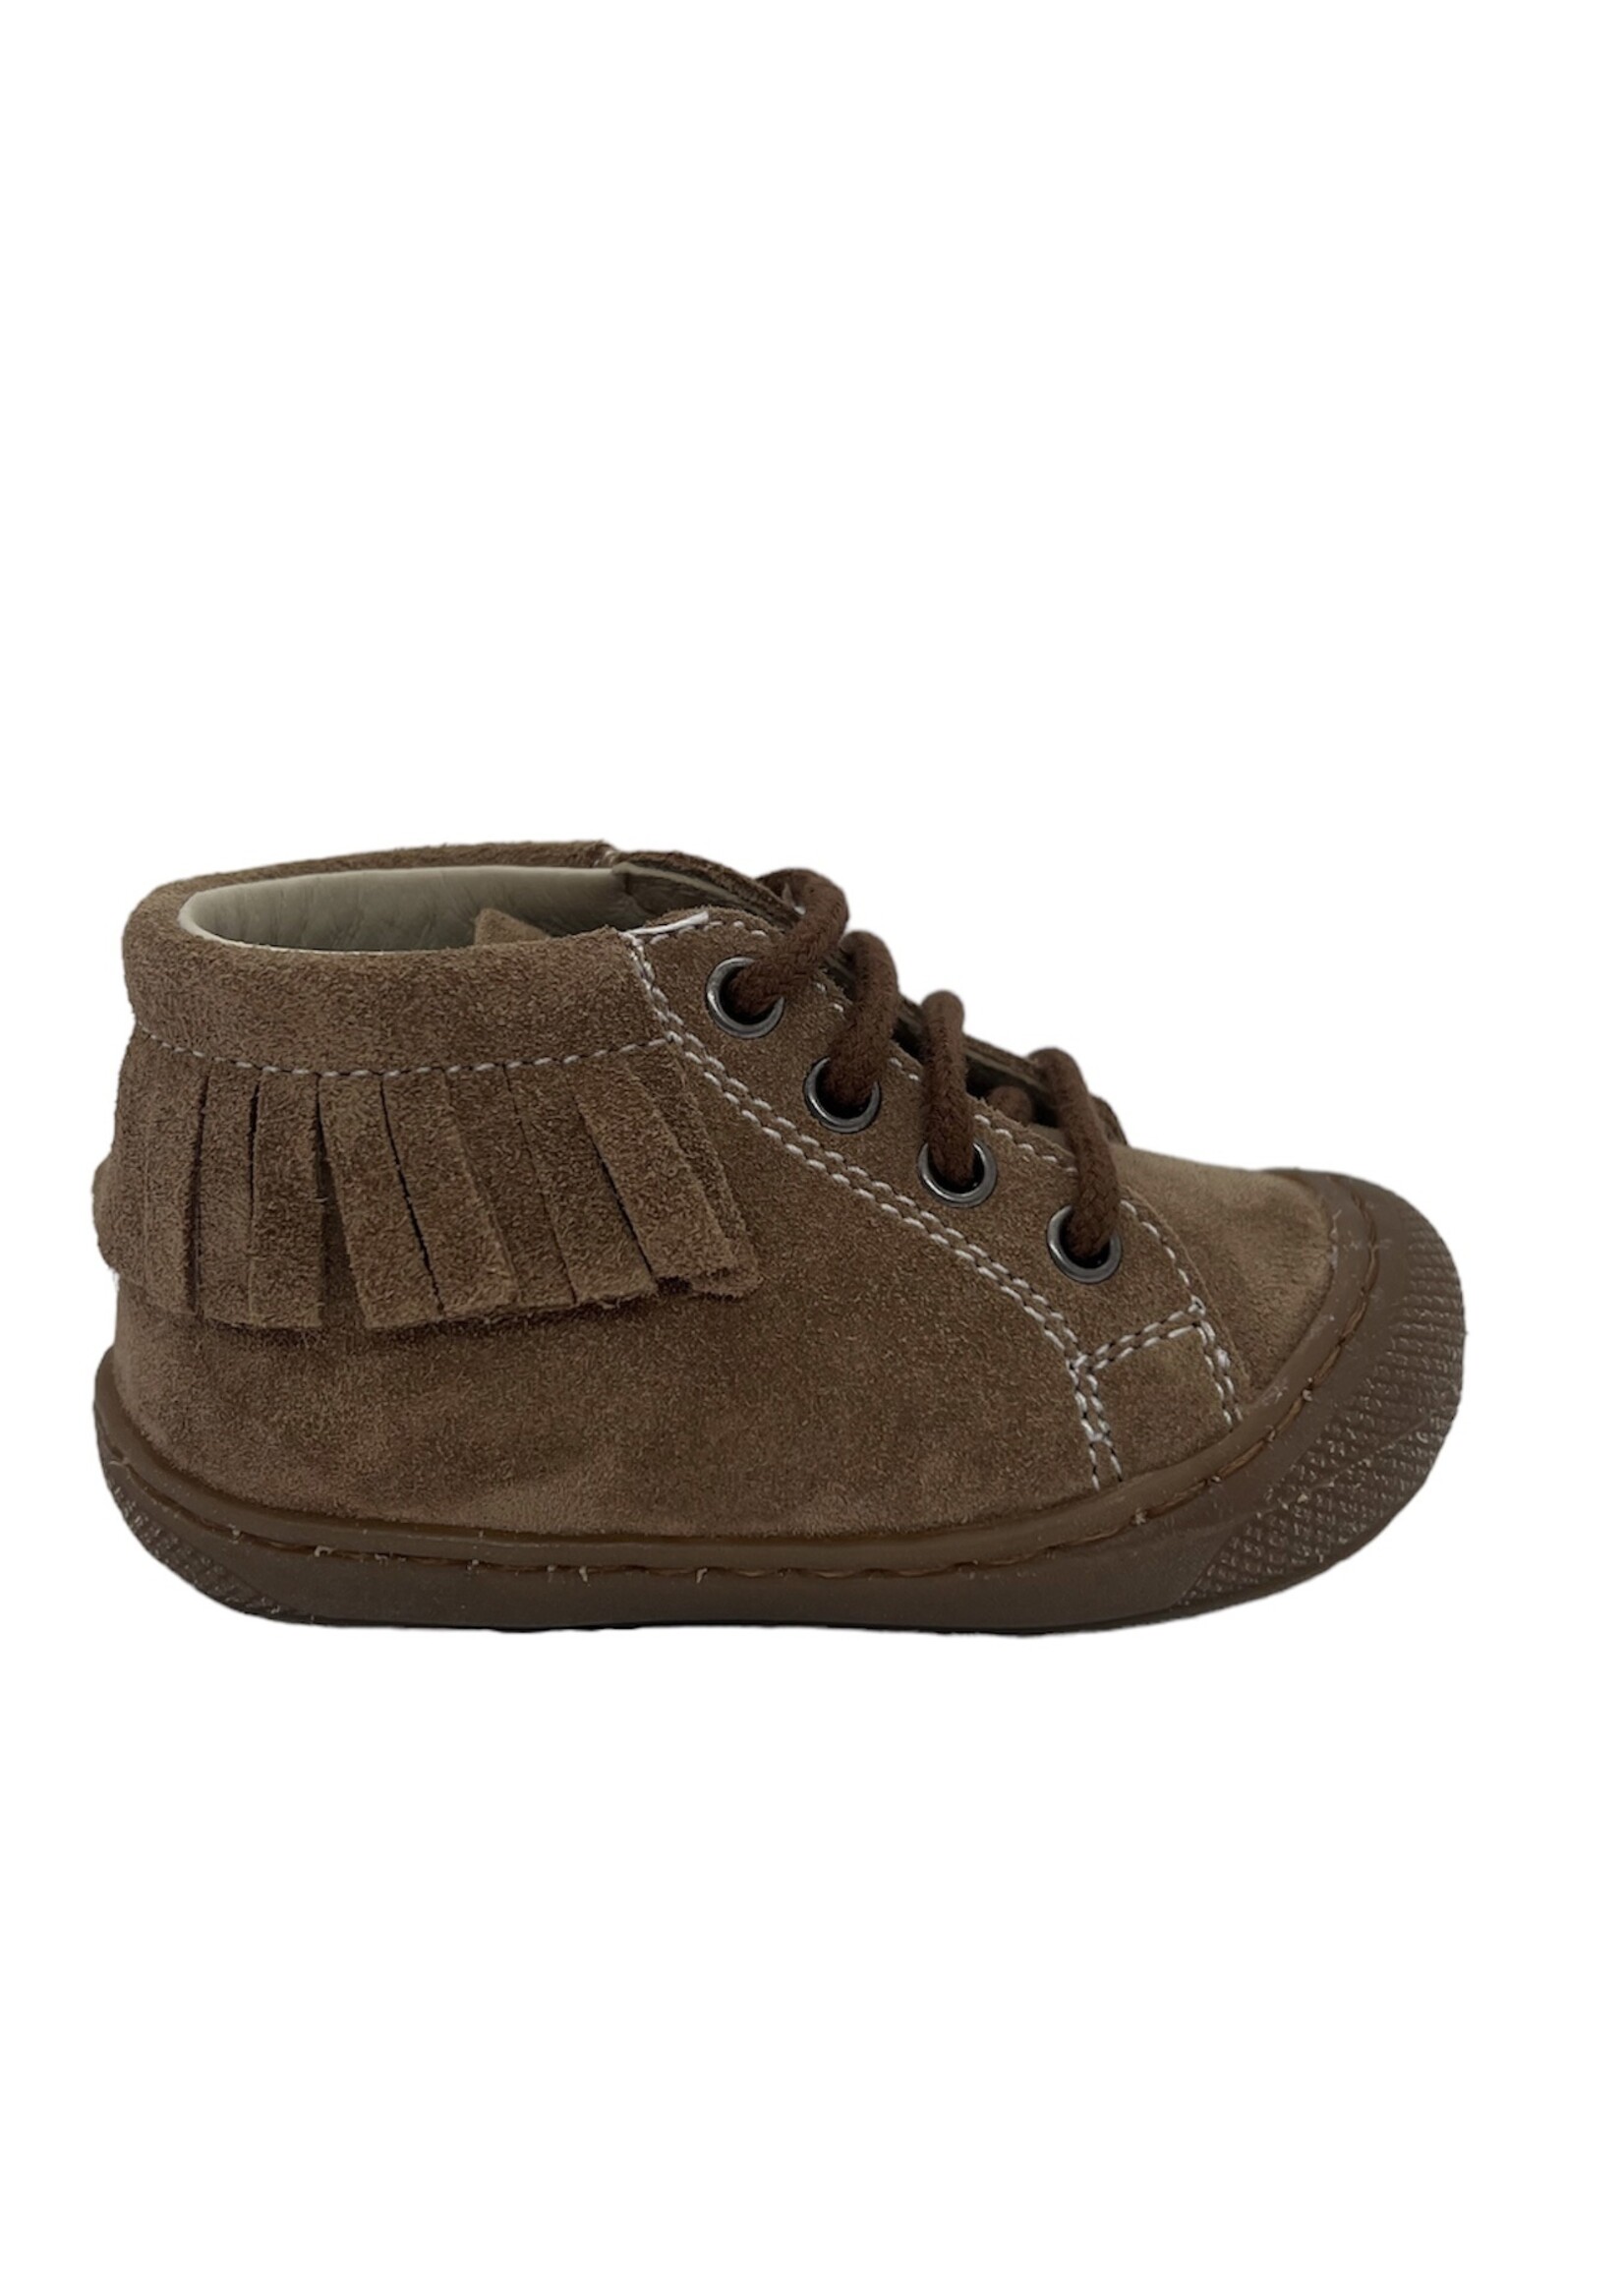 Naturino July one suede brown